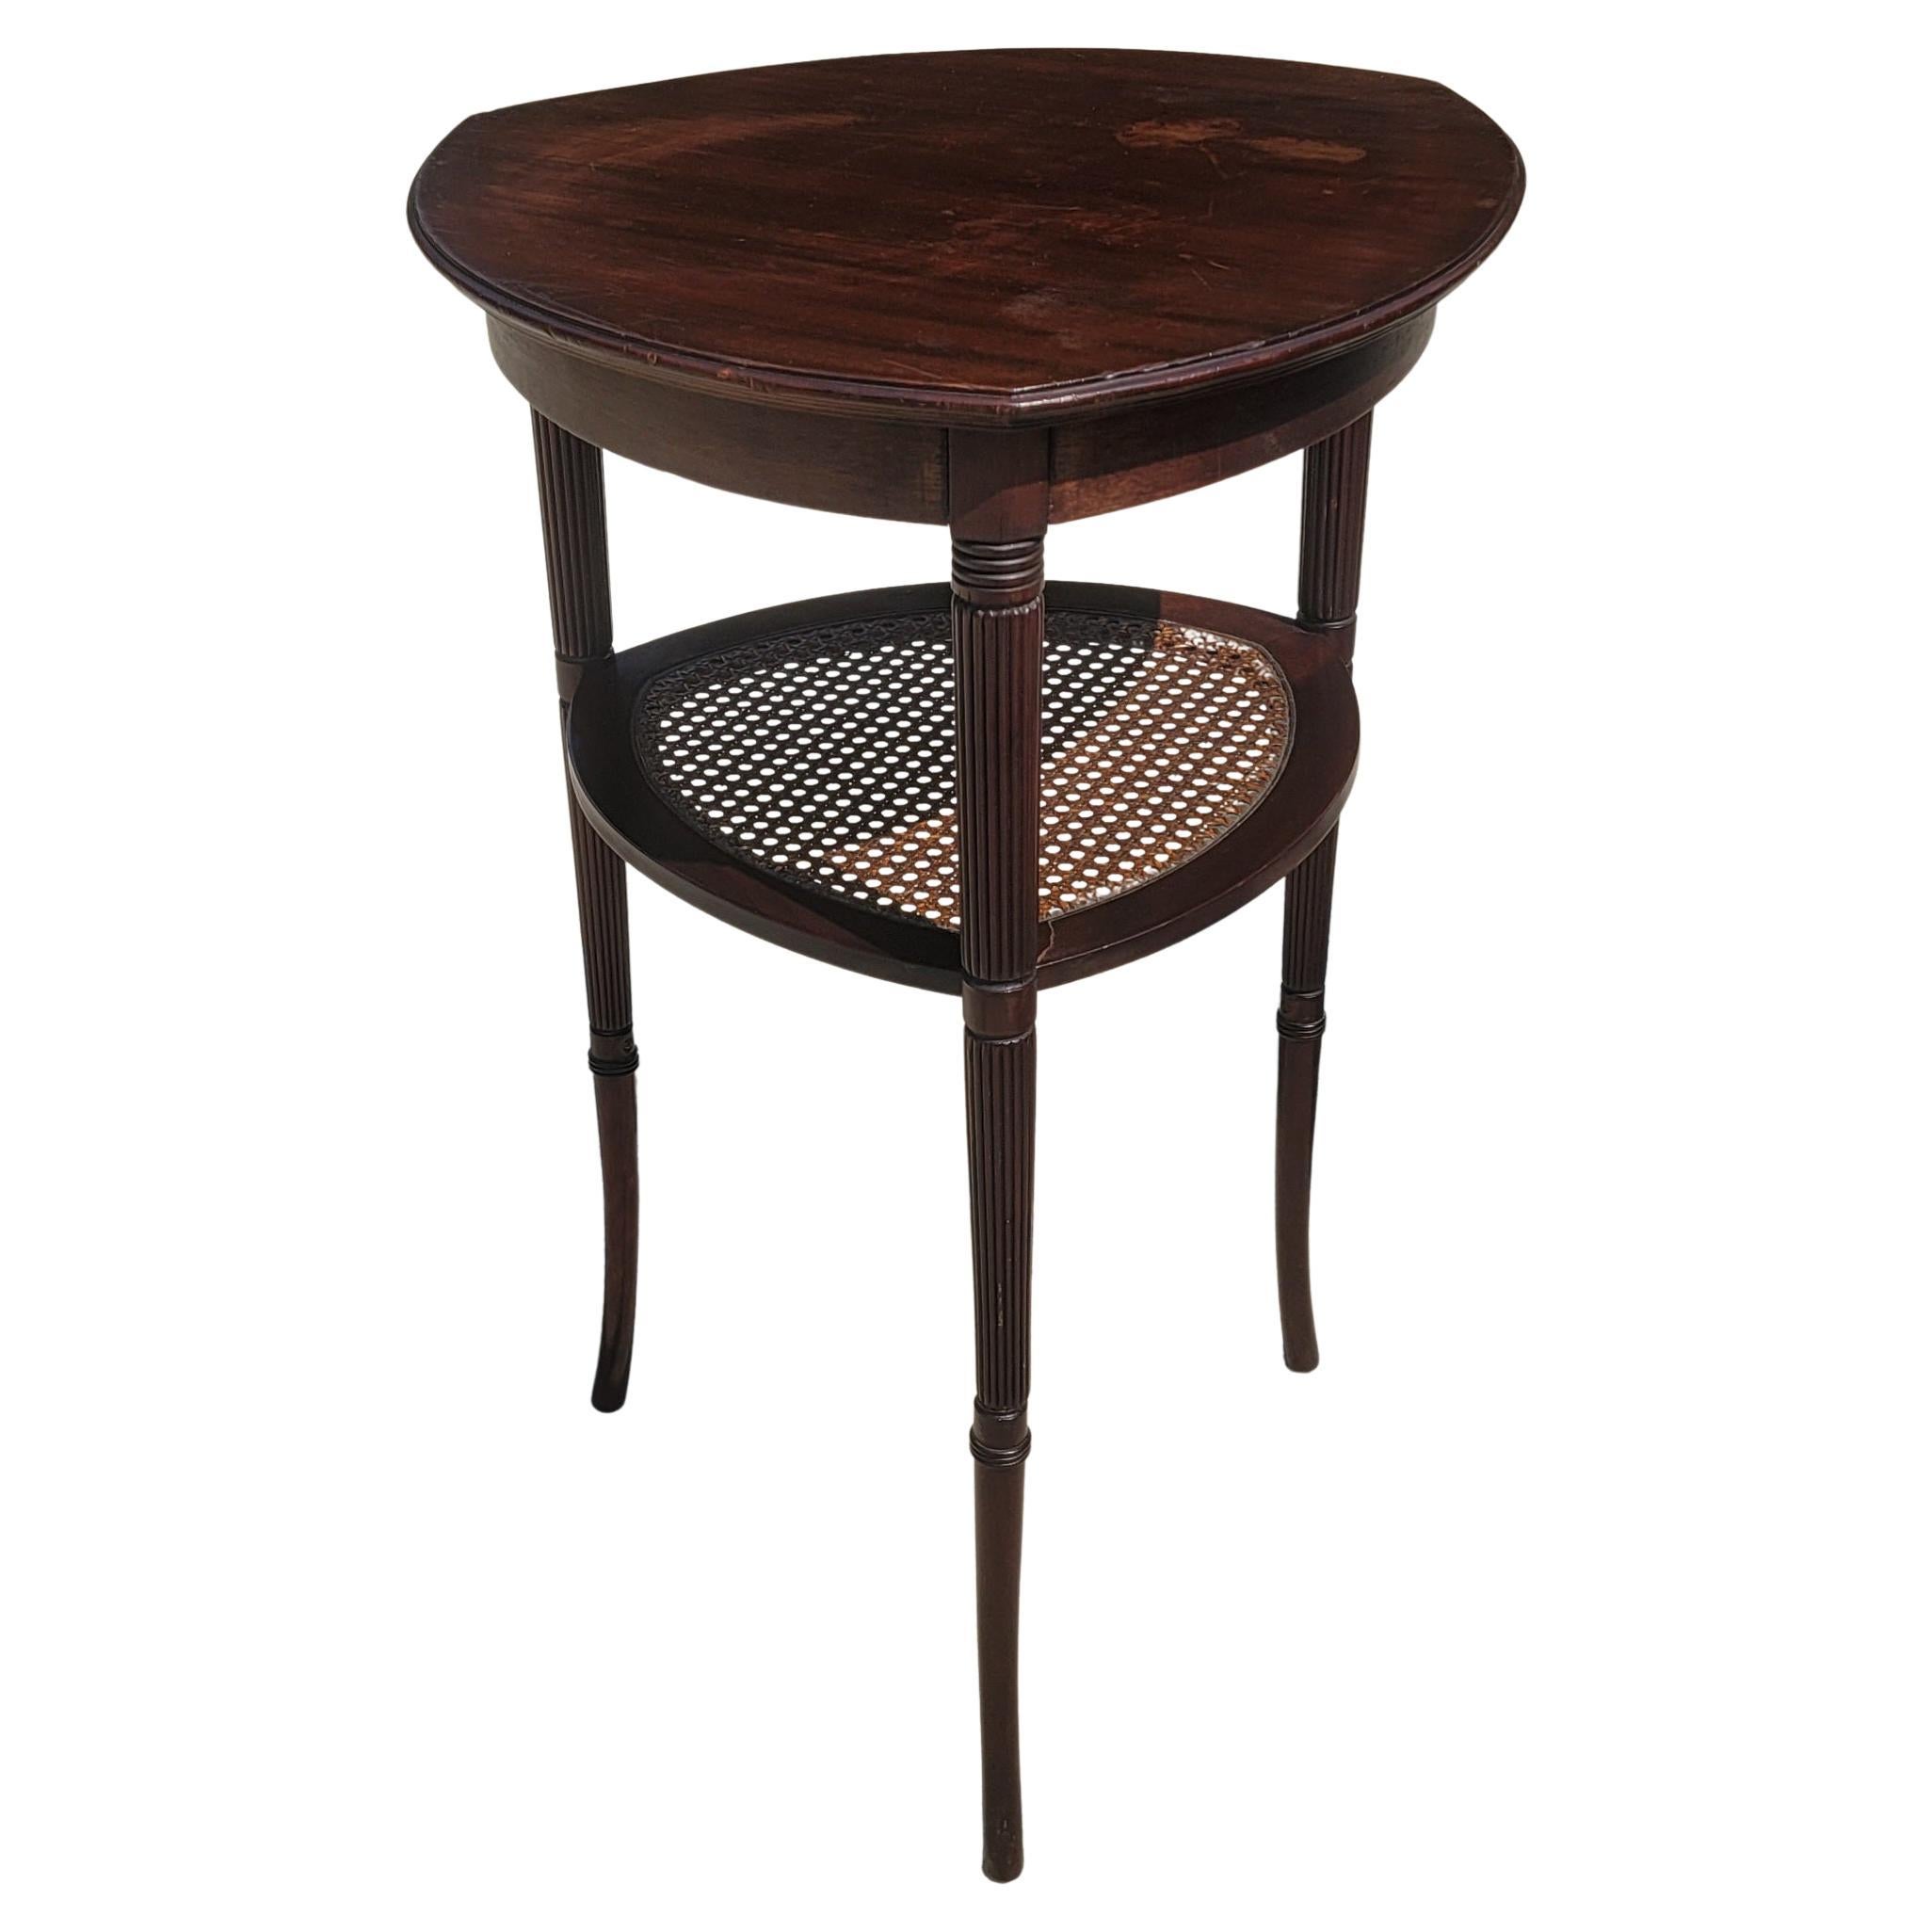 1940s Vintage Triangular Two-Tier Mahogany and Cane Side Table Candle Stand